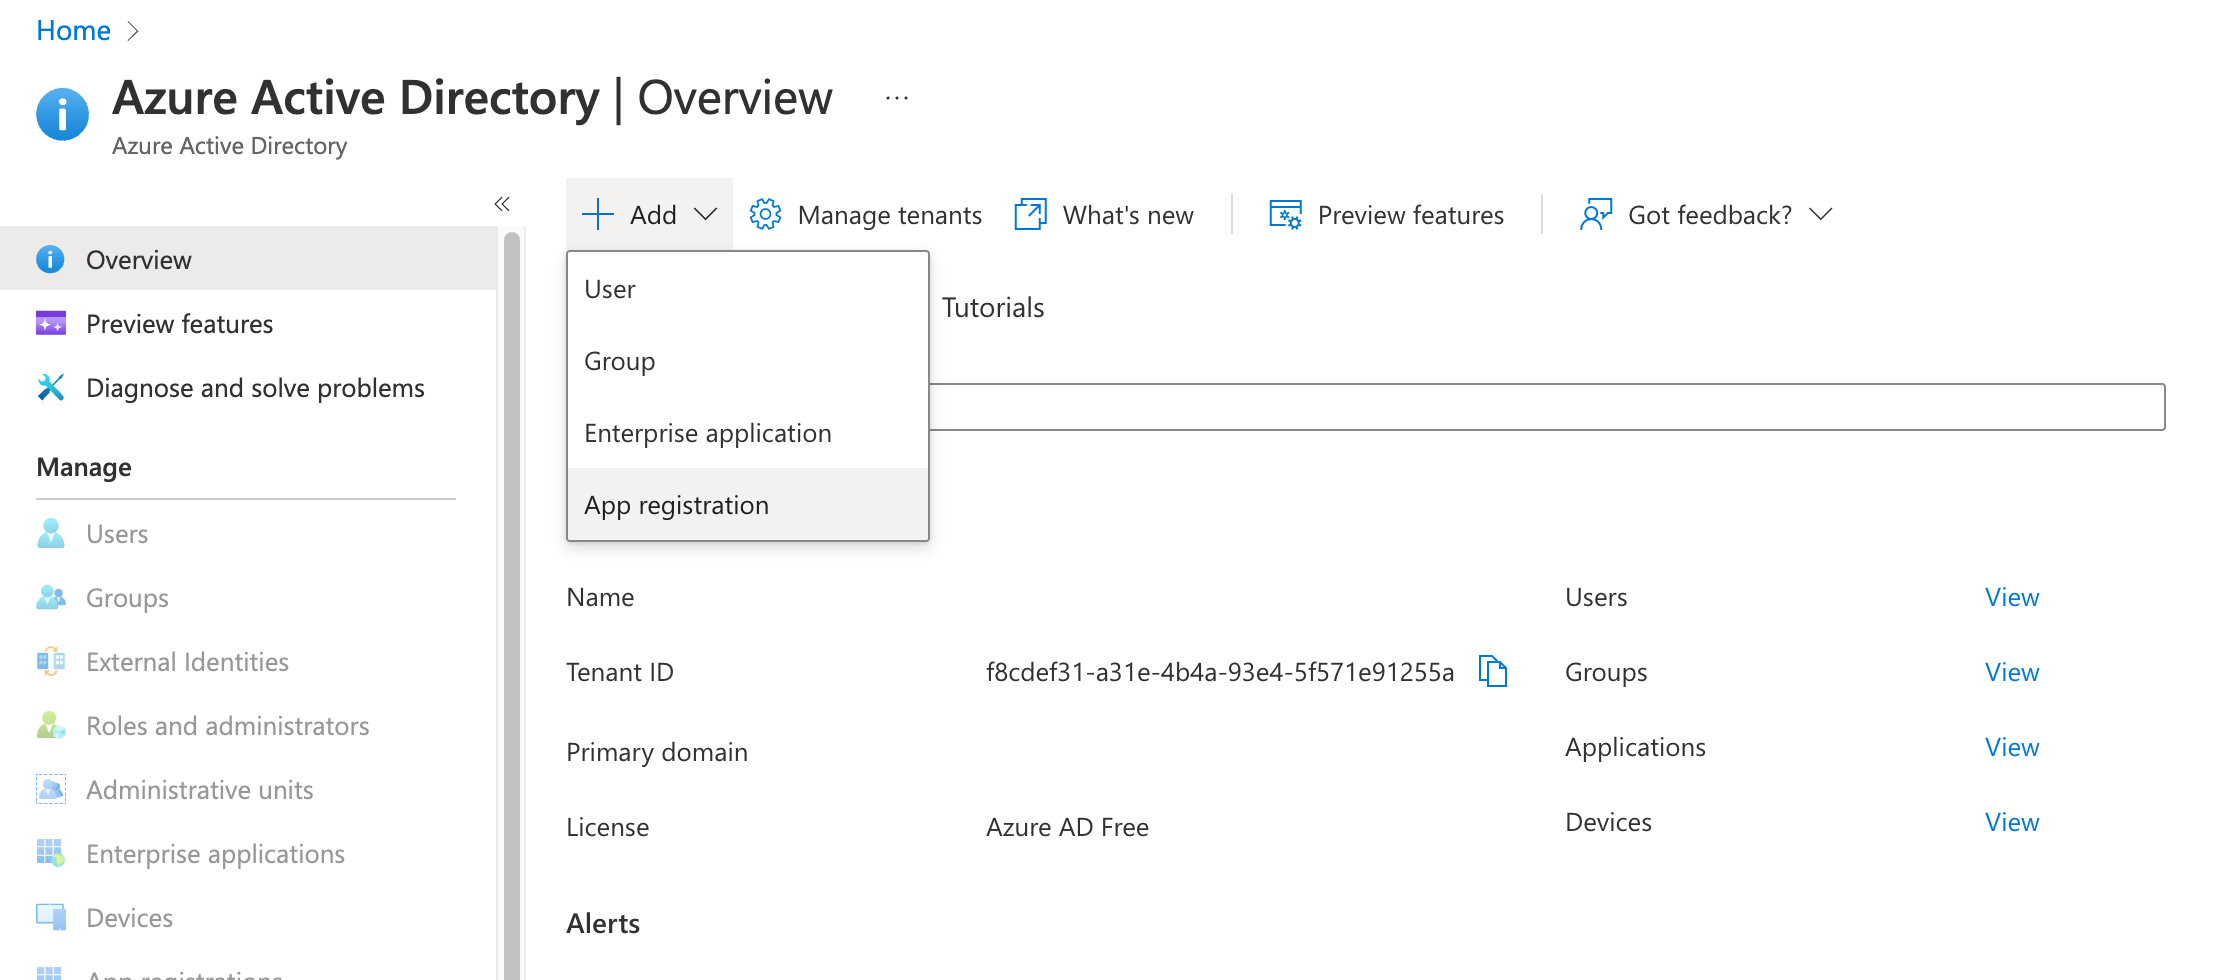 Where to Create an App Integration in Azure